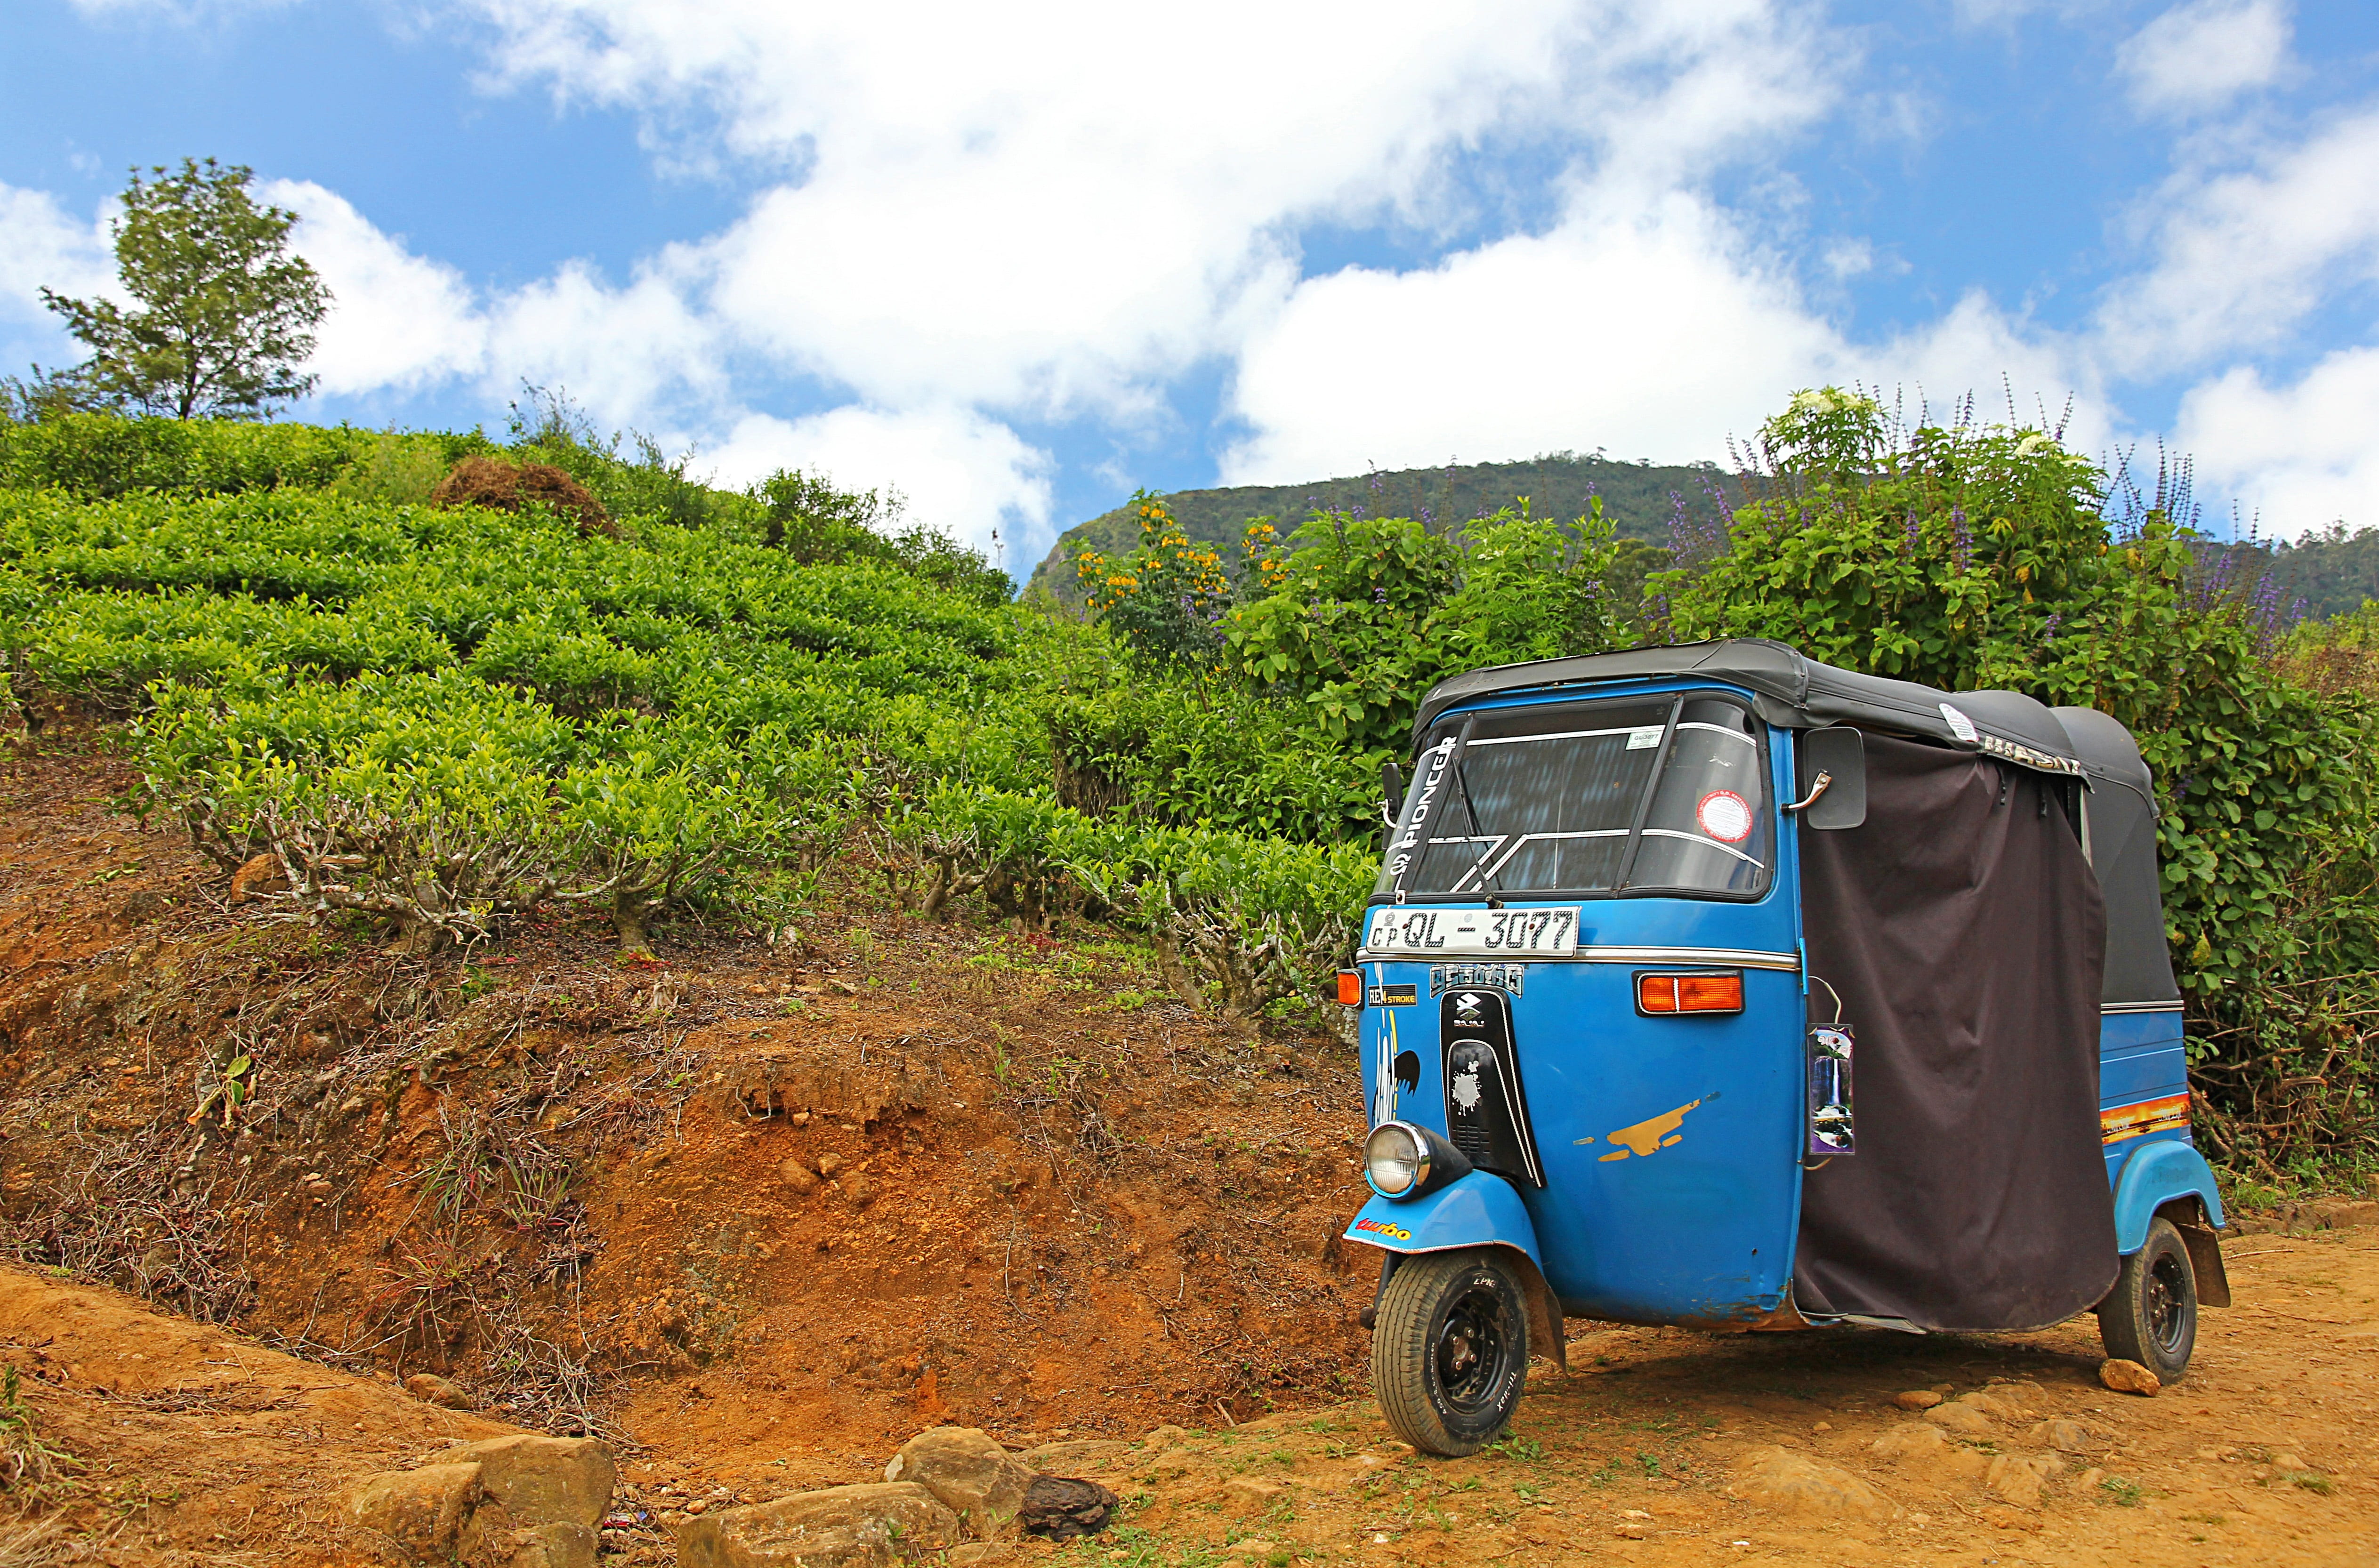 blue and black auto rickshaw parked near green leaf plant during daytime